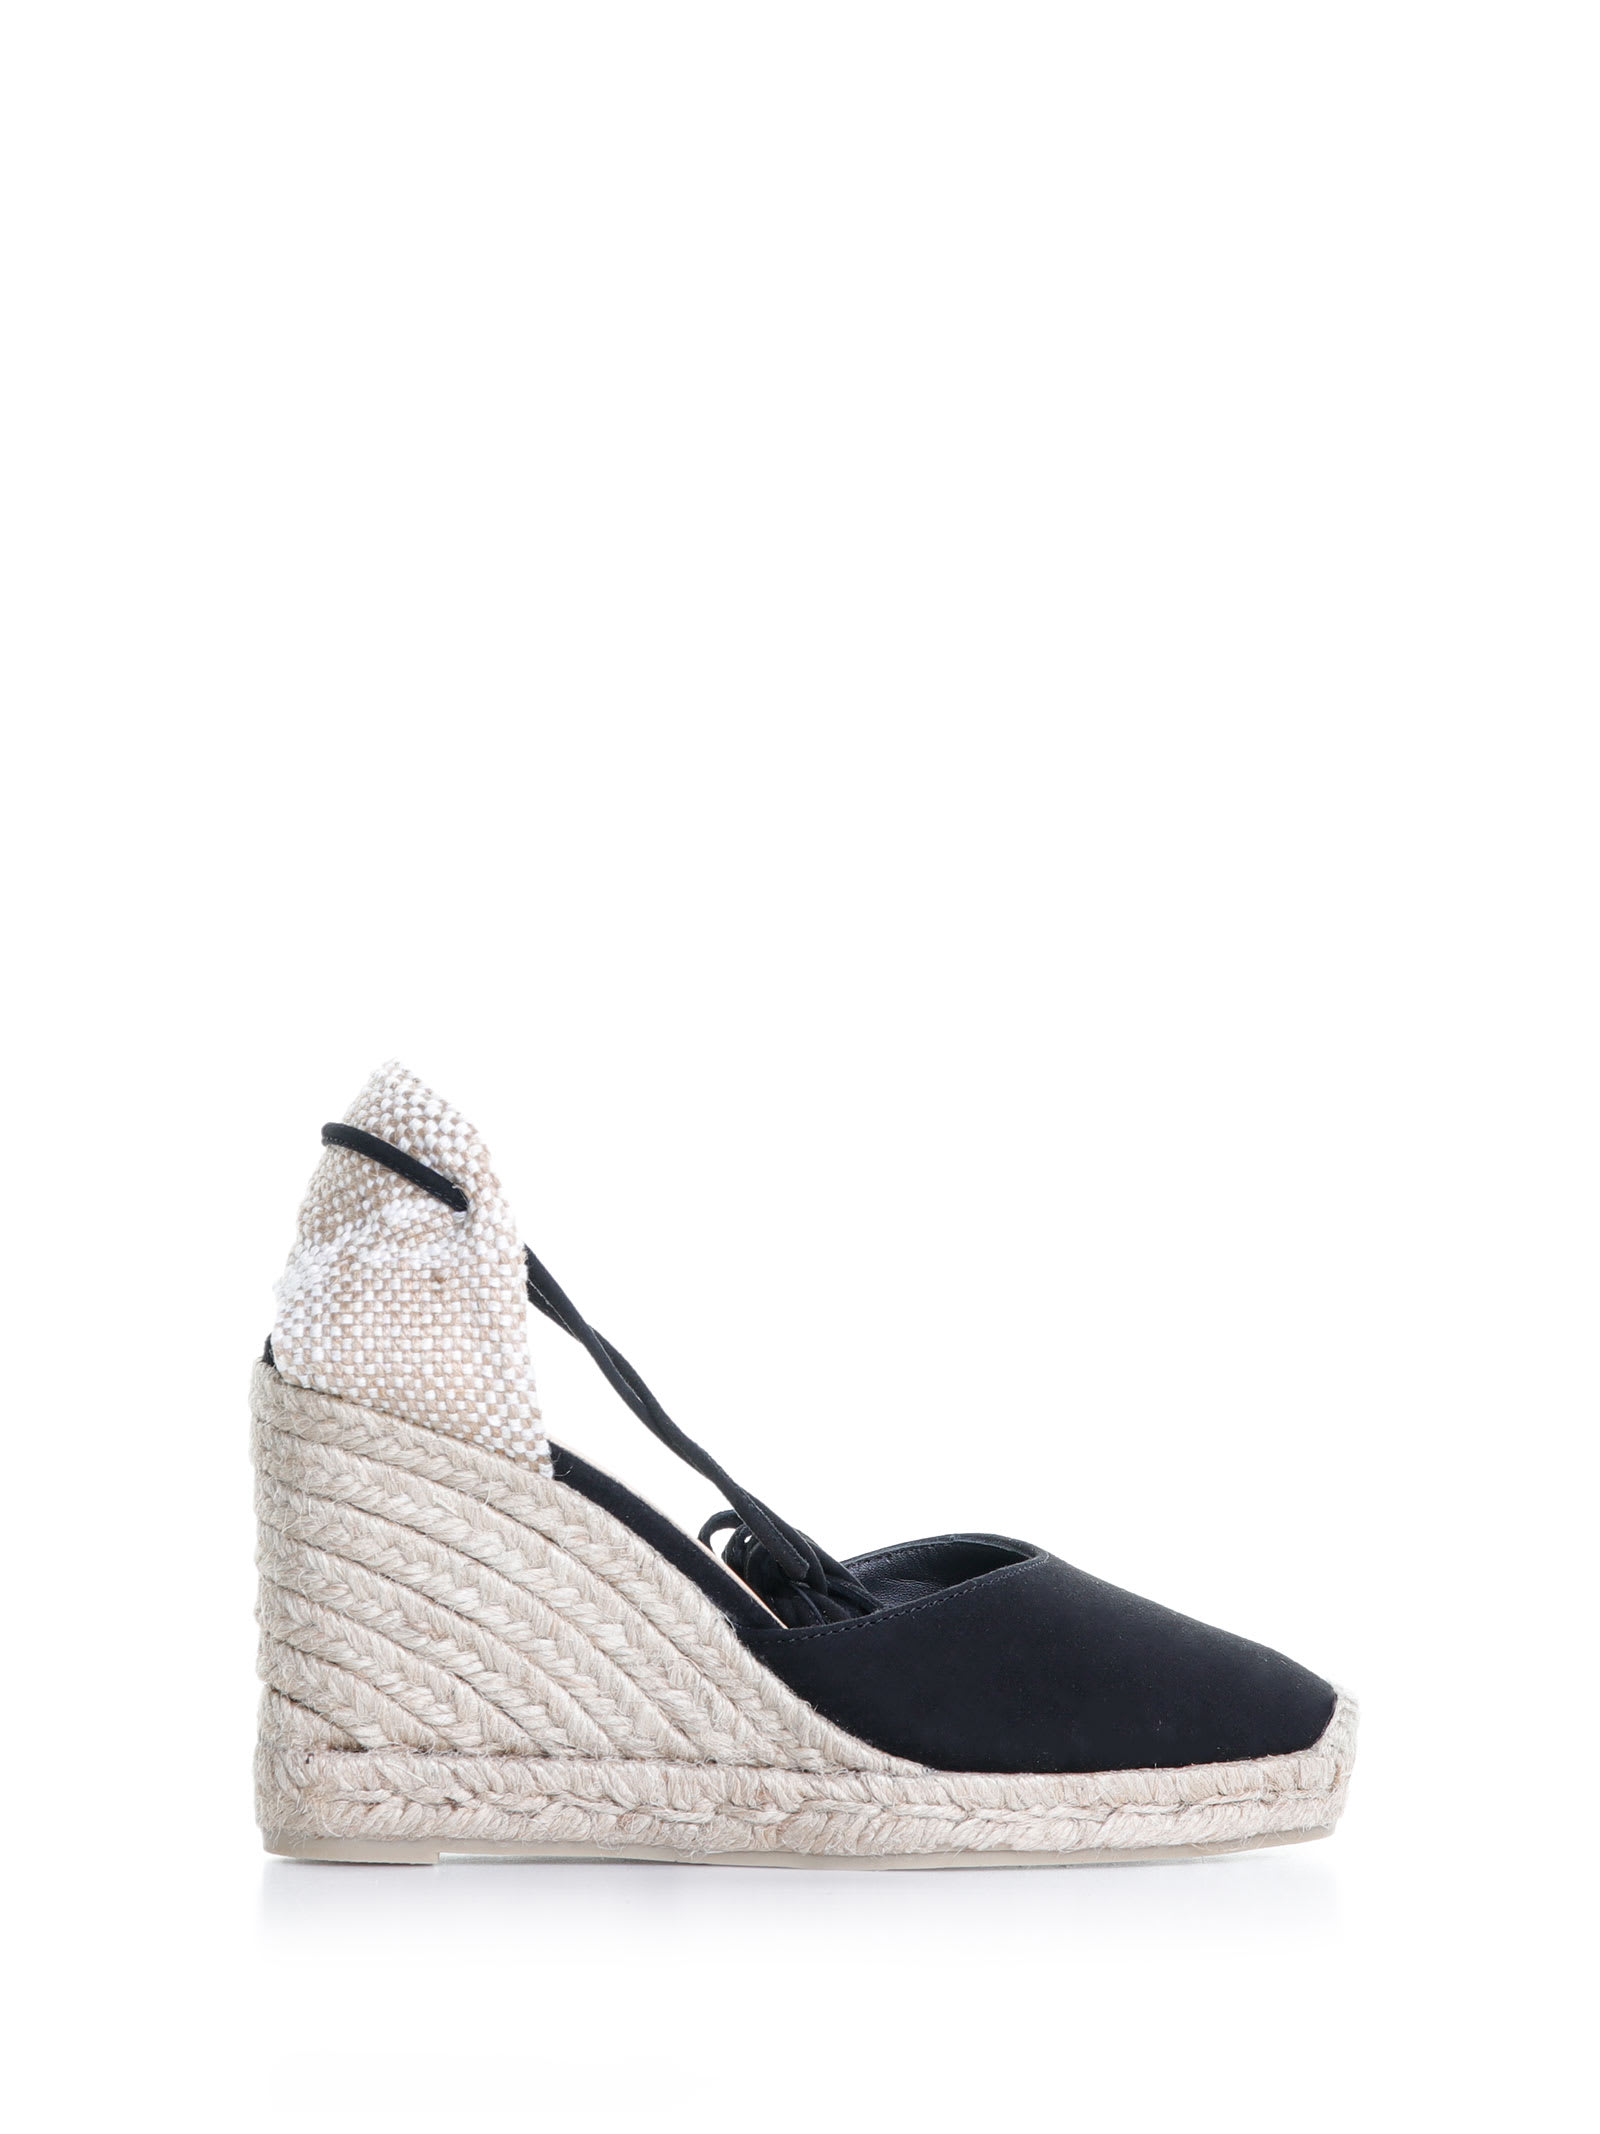 Castañer Black Carina Wedge With Ankle Laces